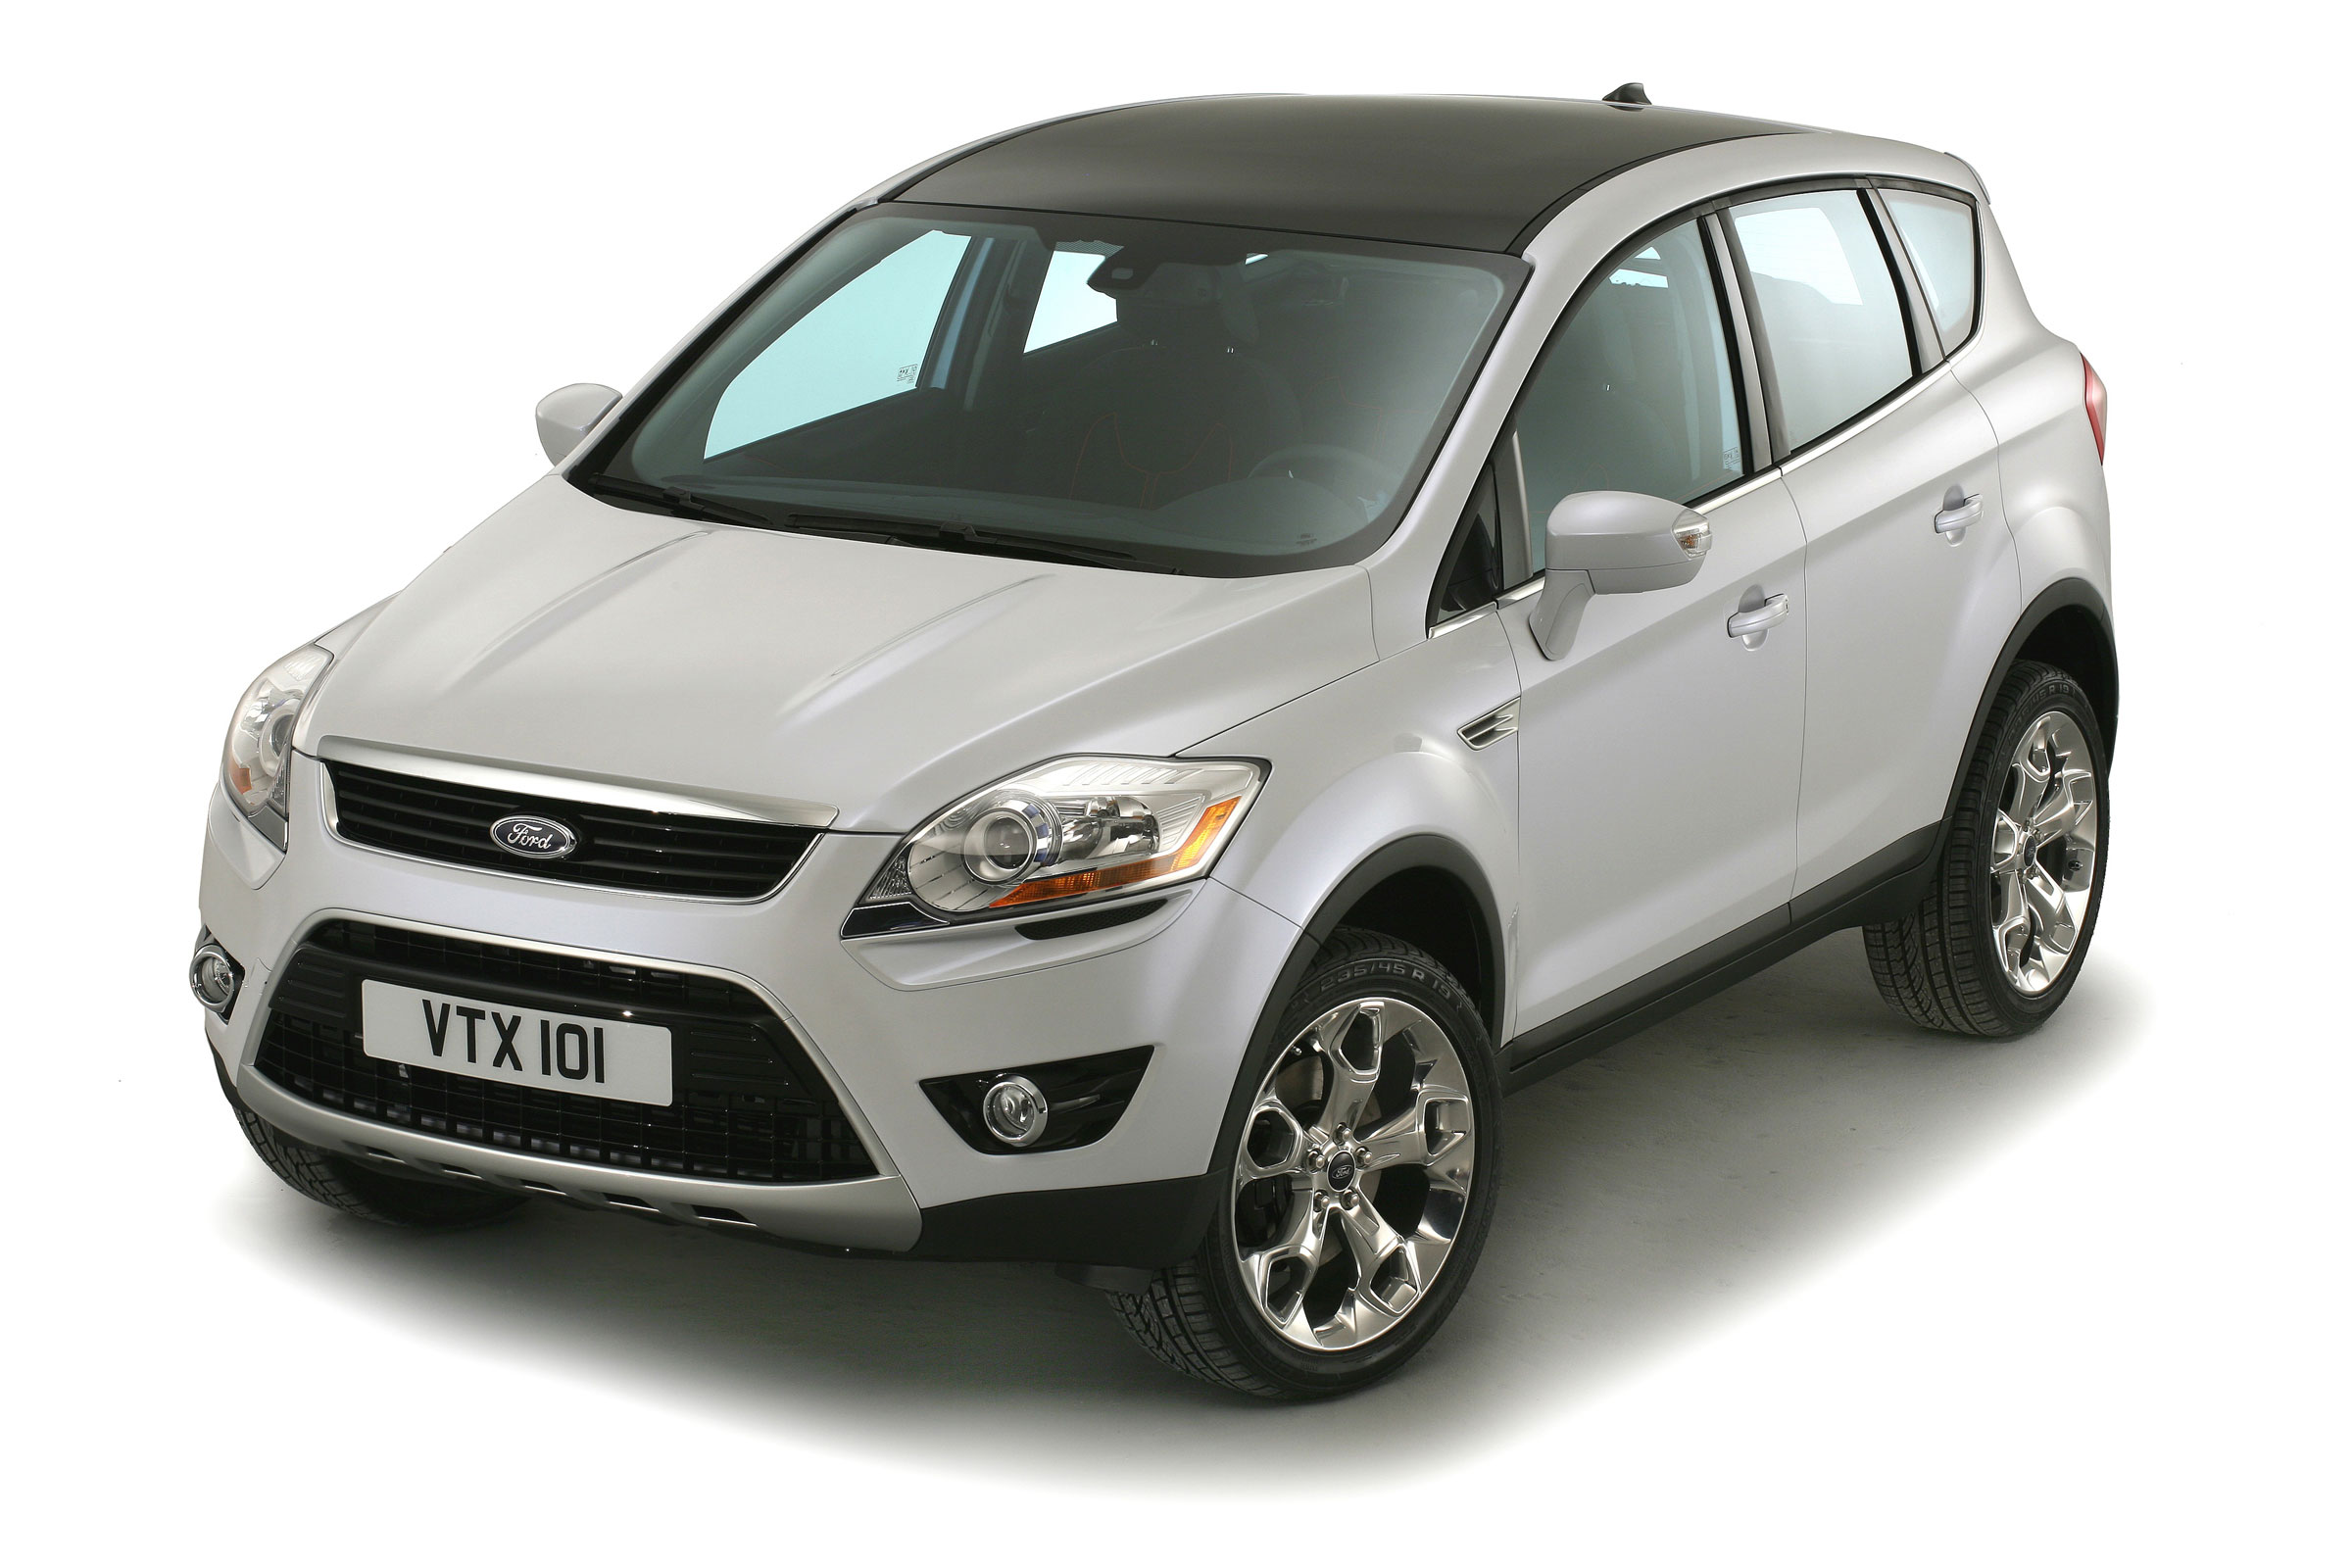 Used Ford Kuga buying guide 2008 2012 Mk1 Carbuyer